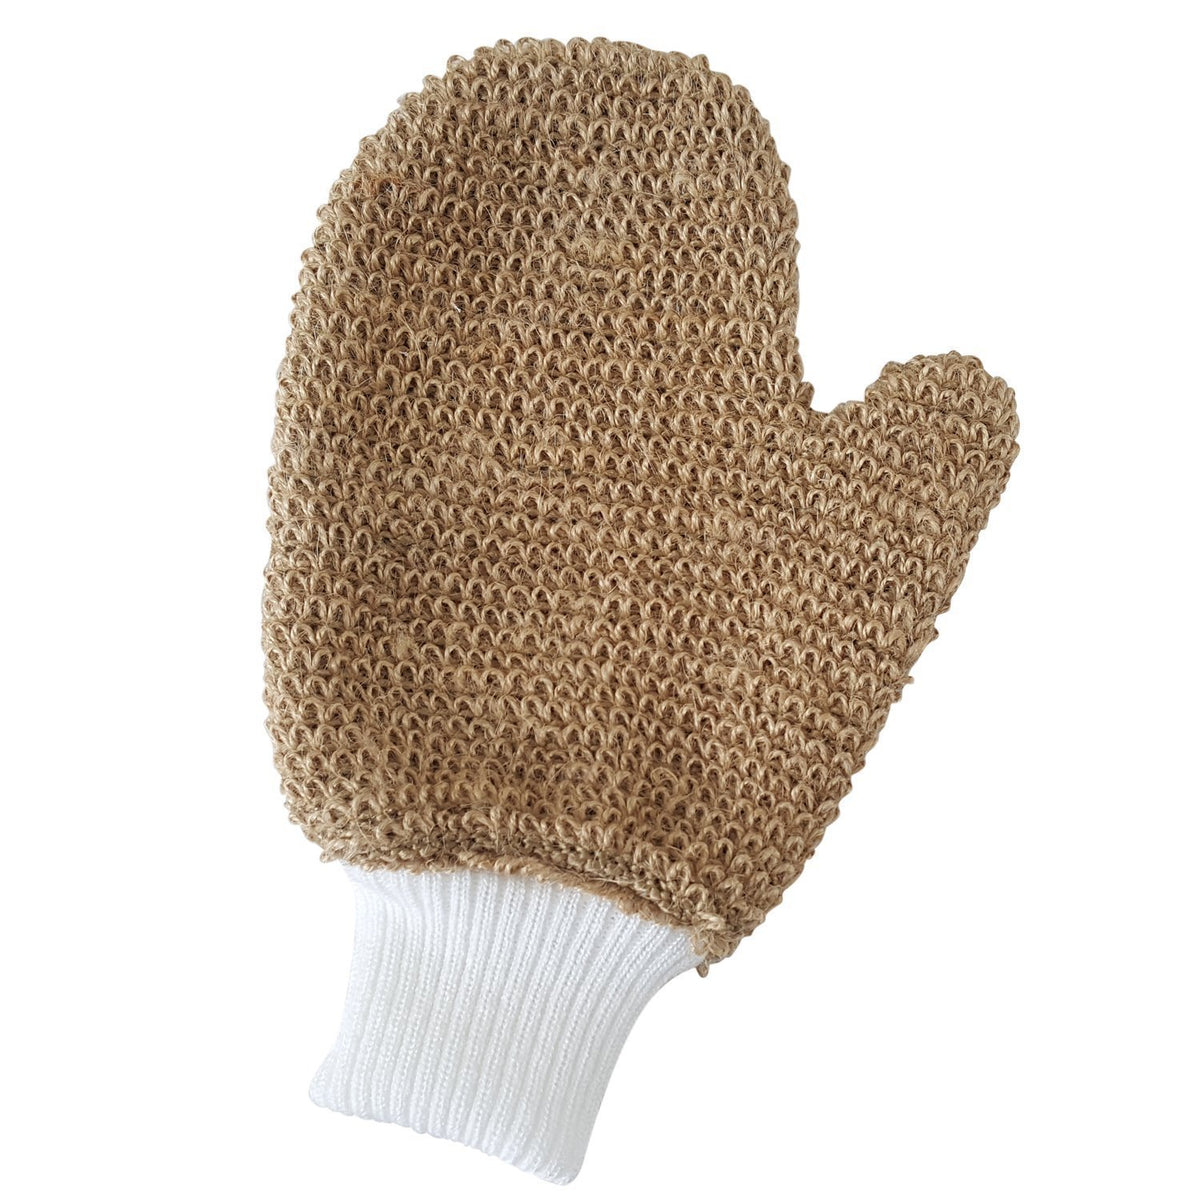 Dry Body Brush Mitts for Cellulite (Set of 2) - Lure Essentials